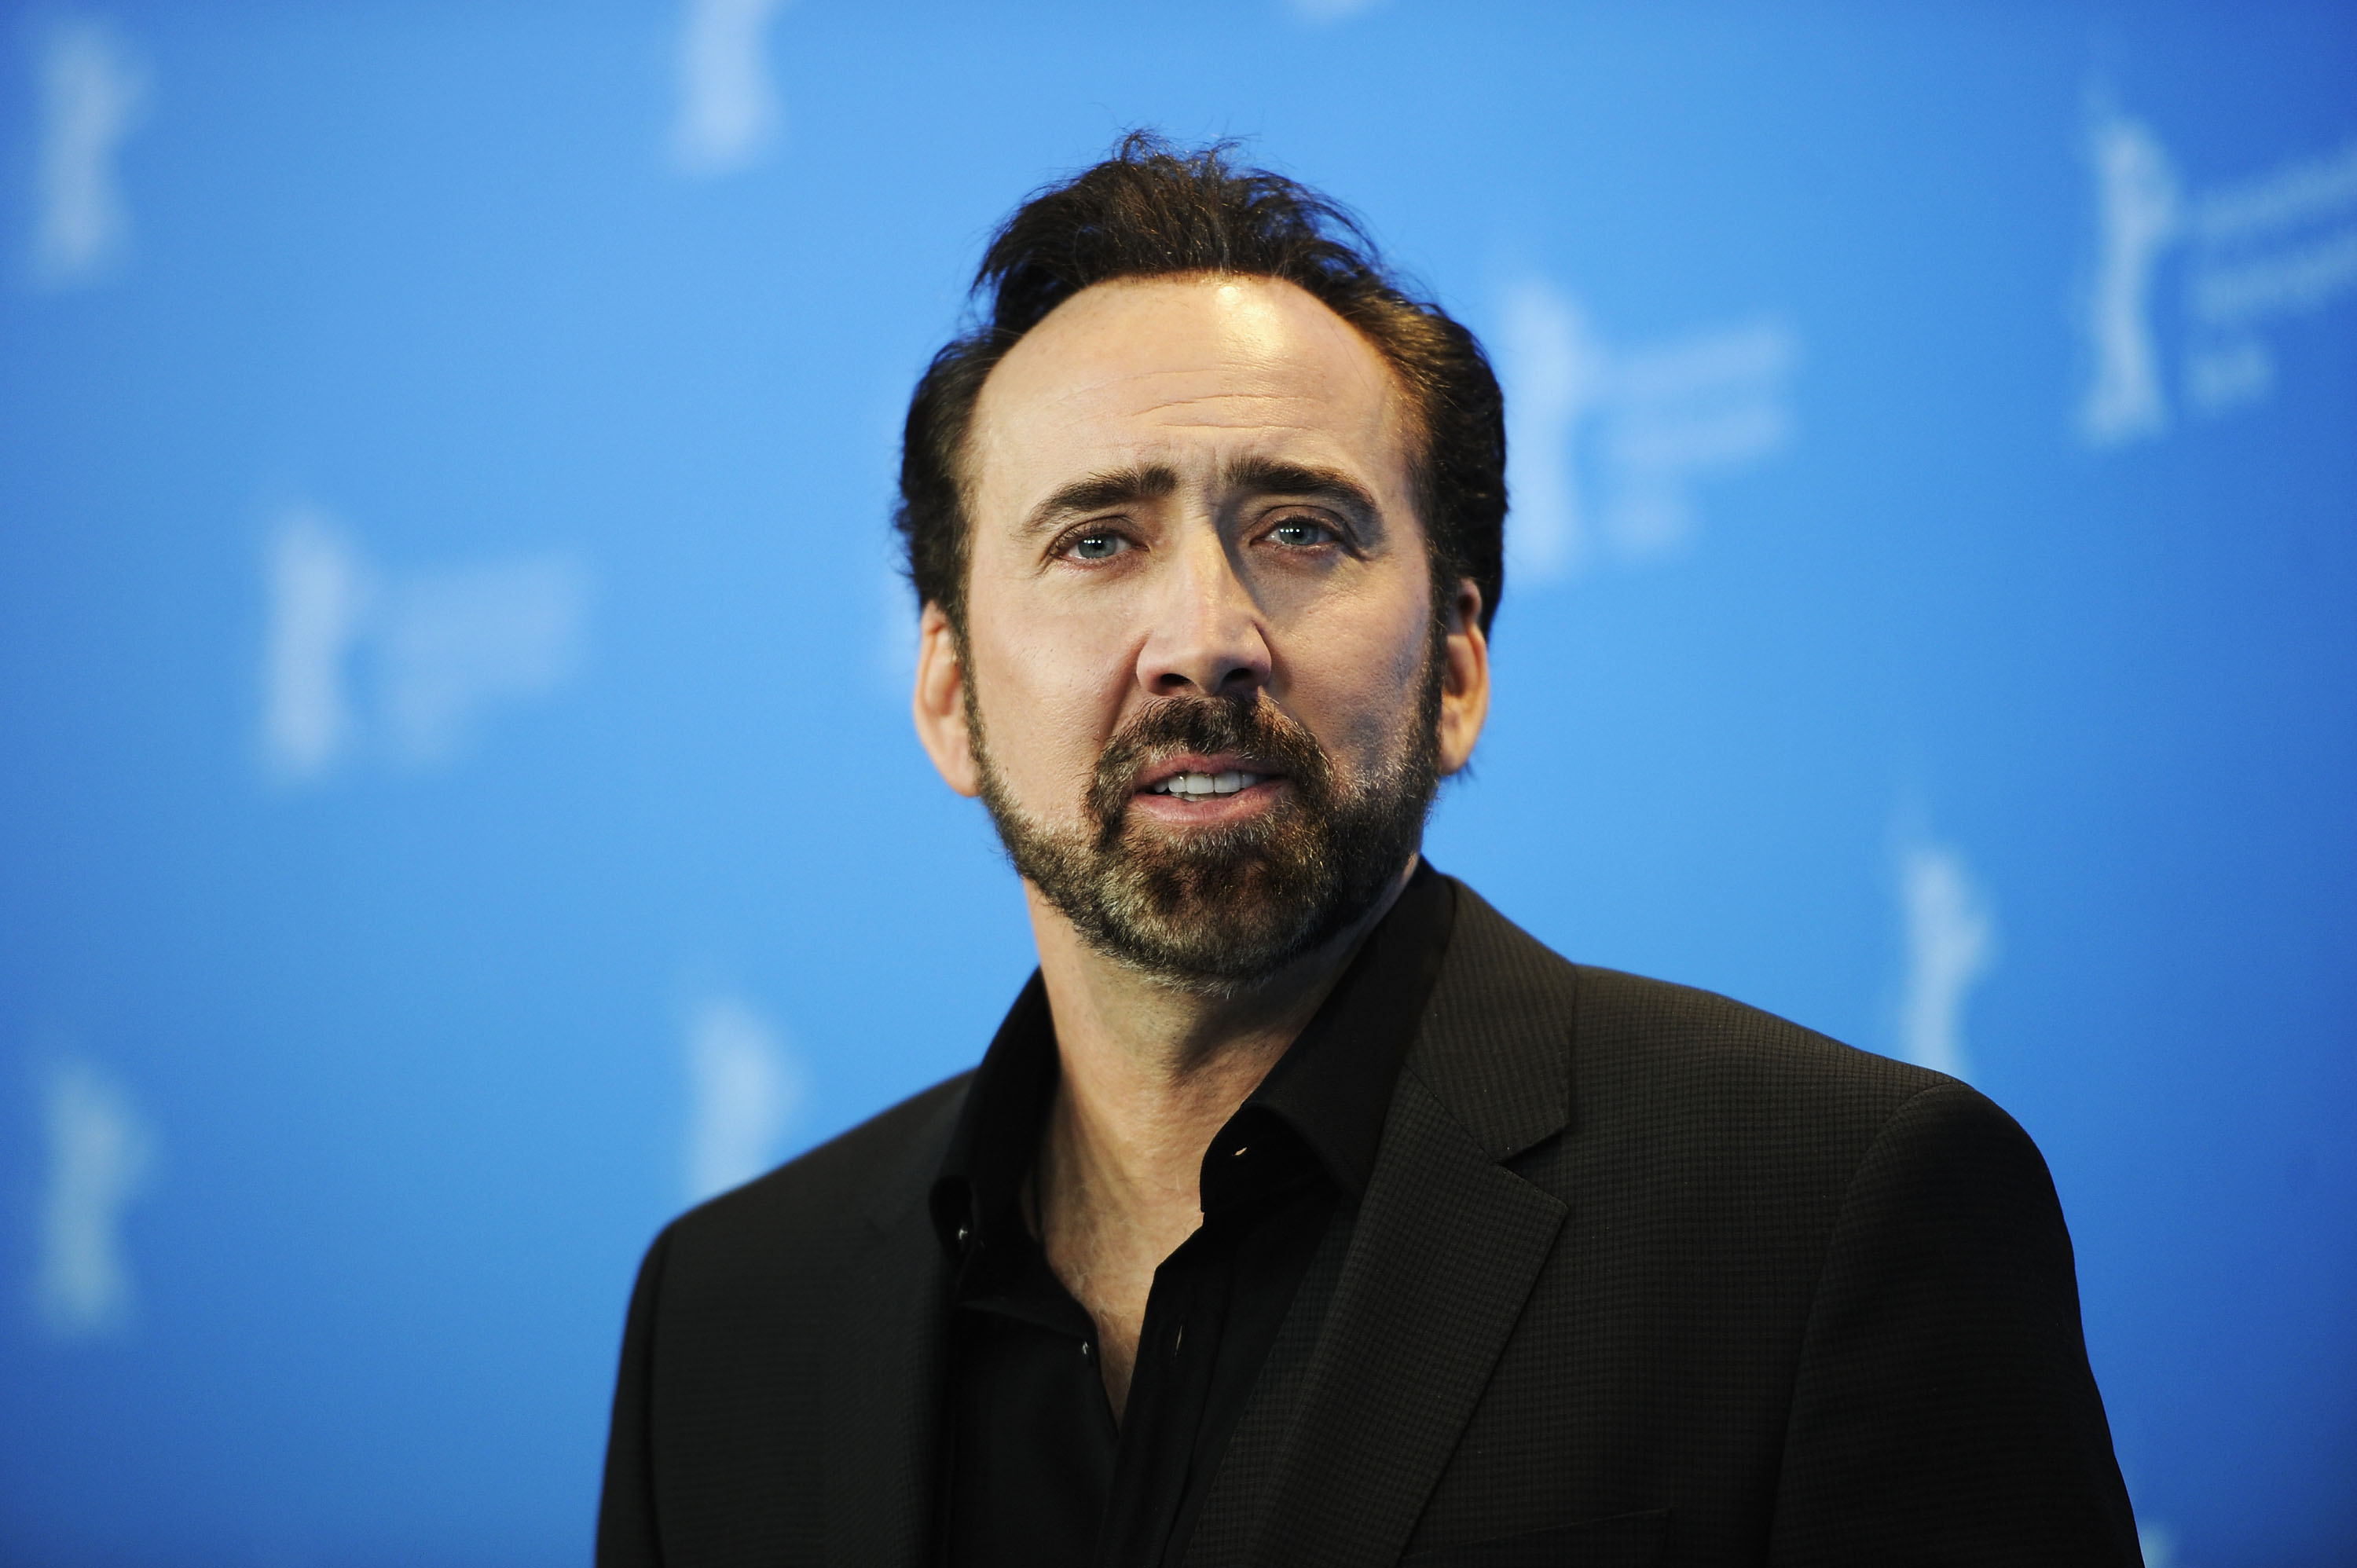 Nicolas Cage at "The Croods" Photocall during the 63rd Berlinale International Film Festival on February 15, 2013, in Berlin, Germany | Source: Getty Images